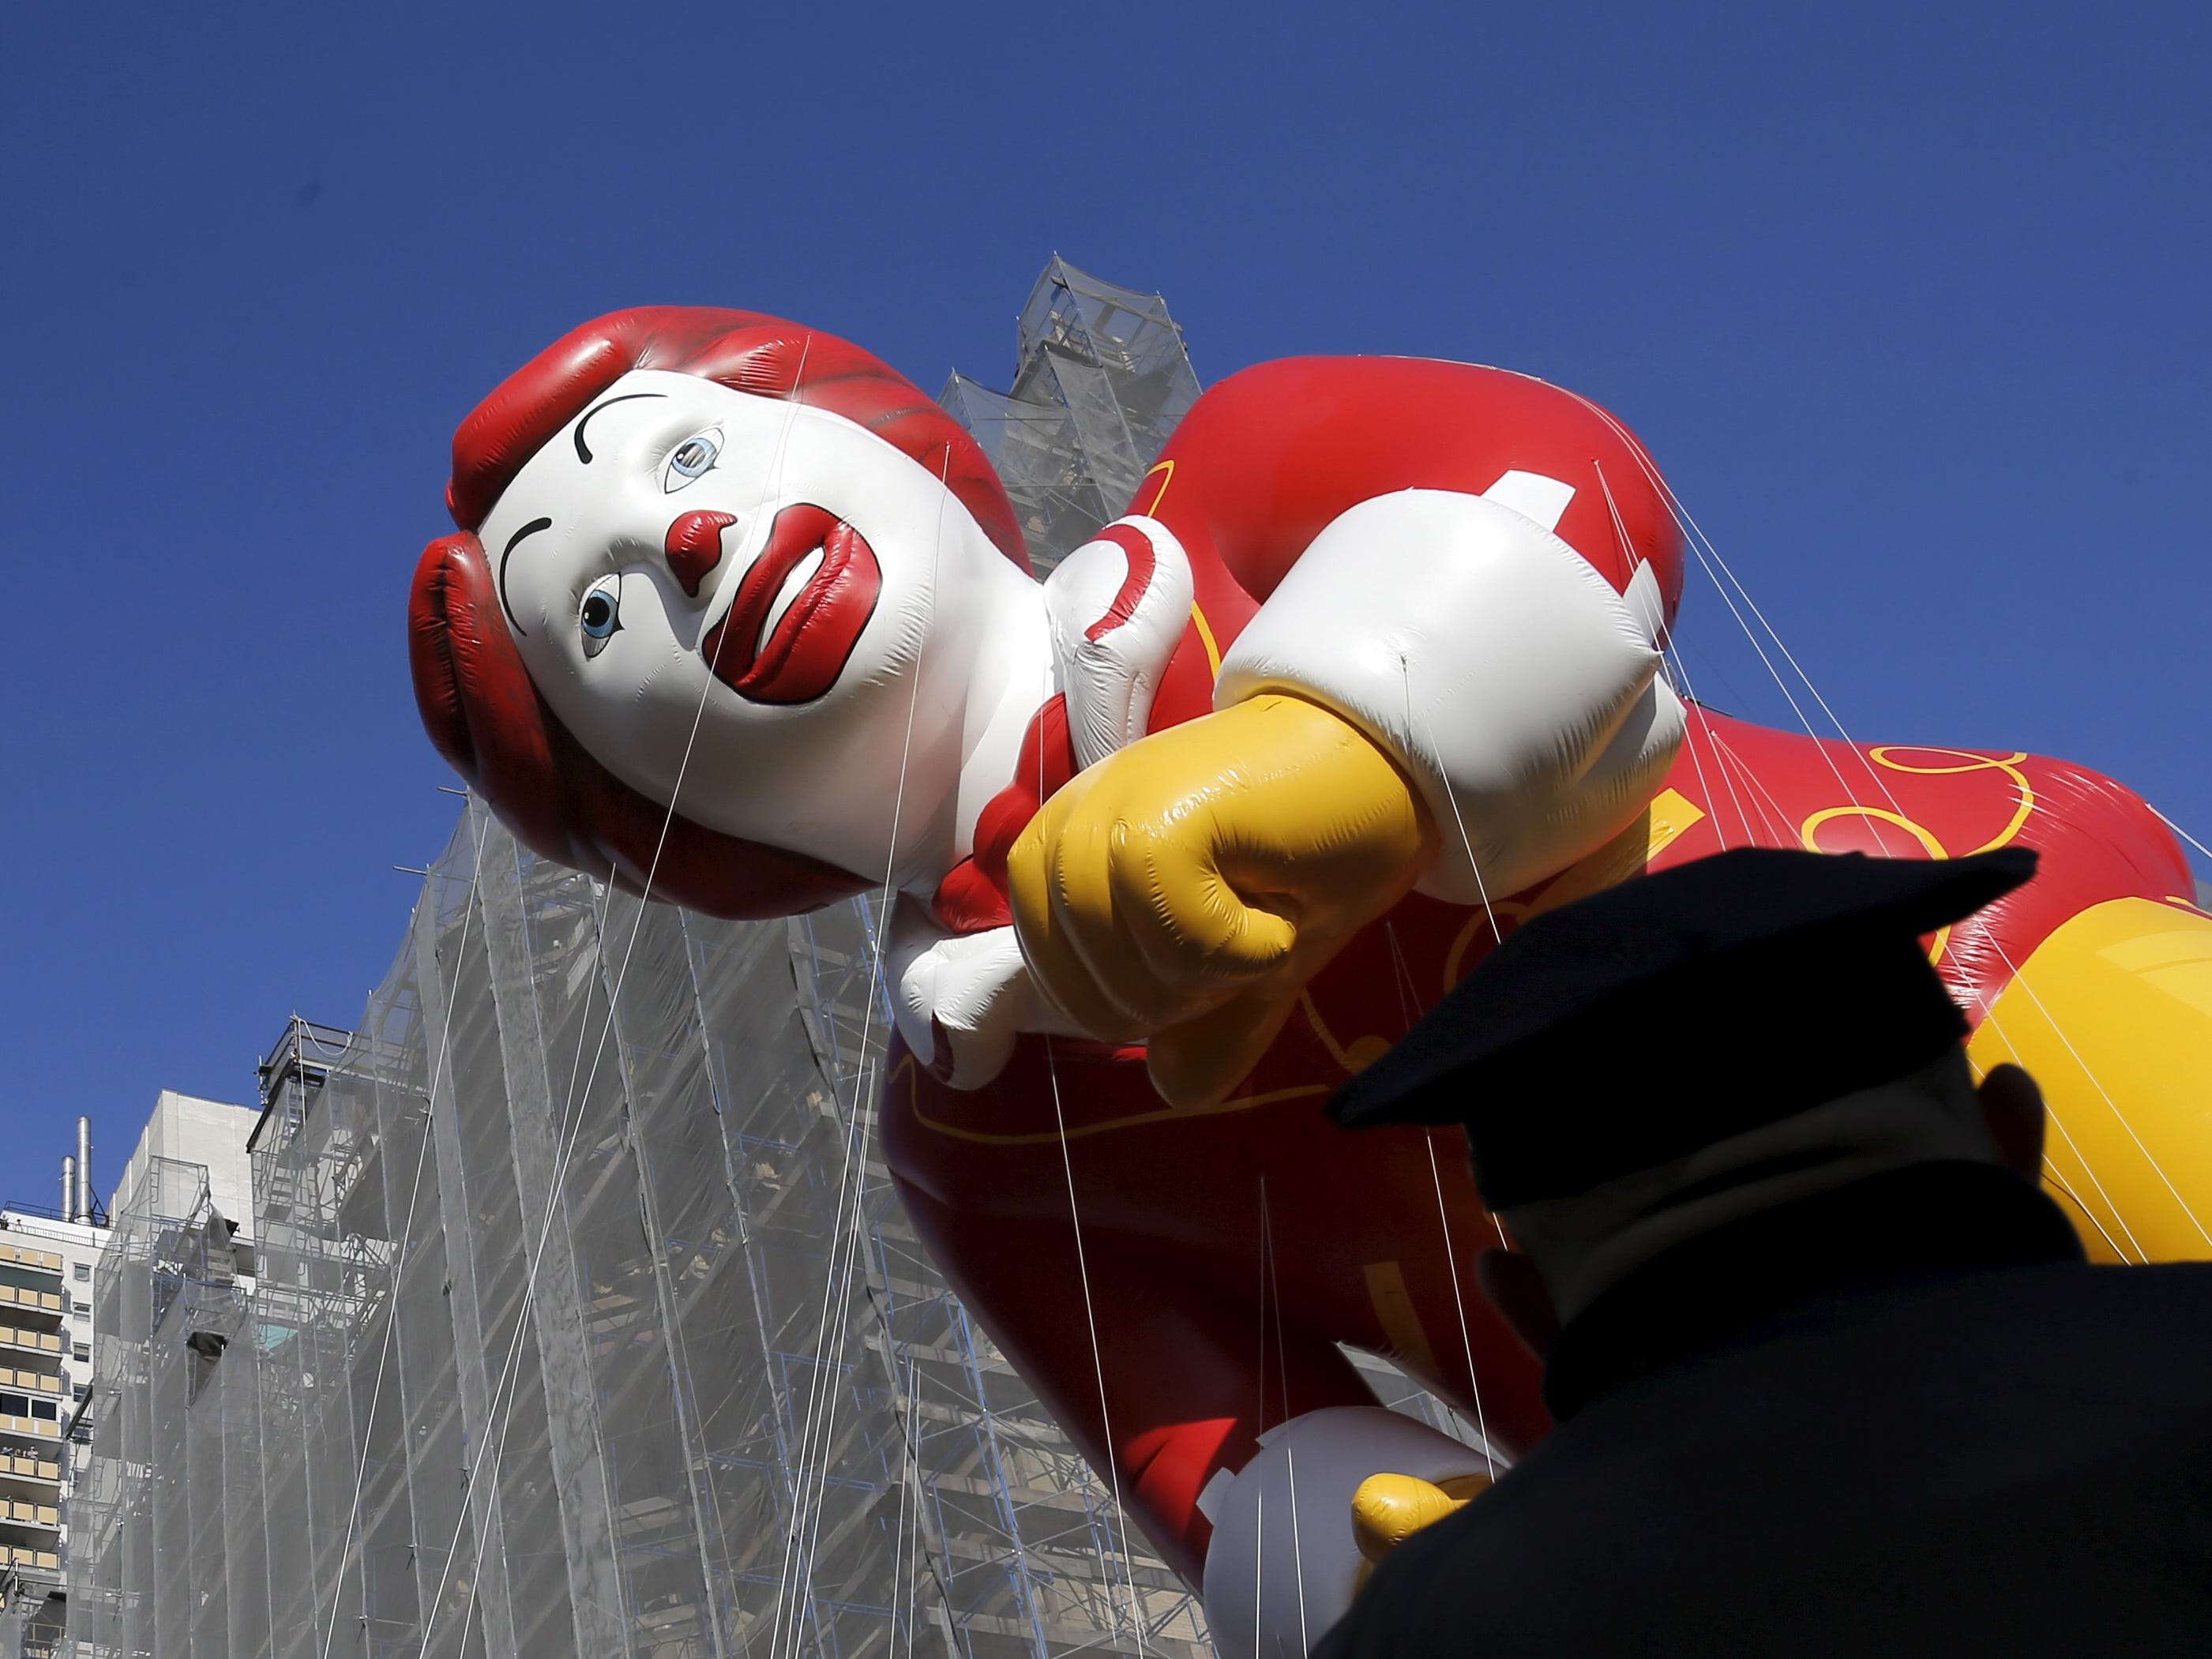 McDonalds slammed with 3 new sexual-harassment lawsuits as workers say the fast-food giant failed to protect them on the job Business Insider India